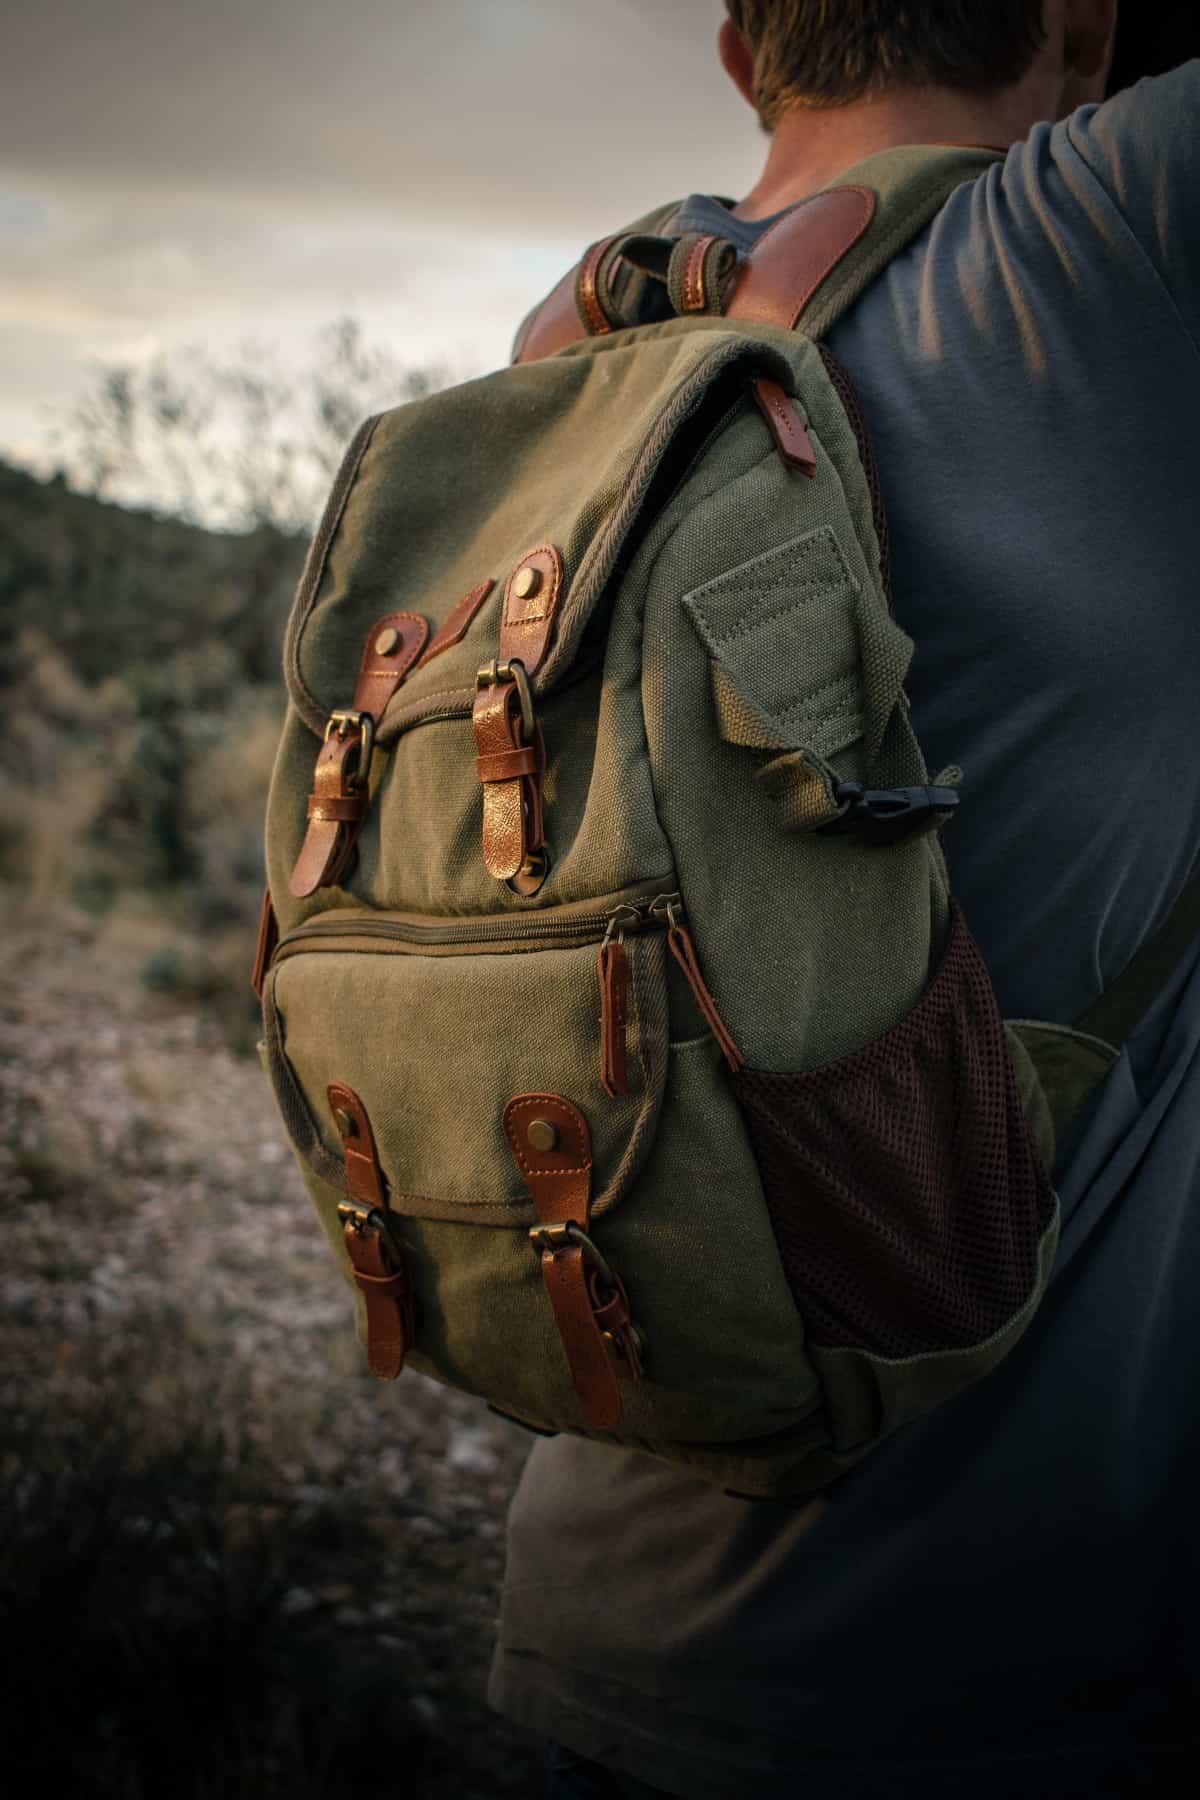 A man wearing a green backpack.